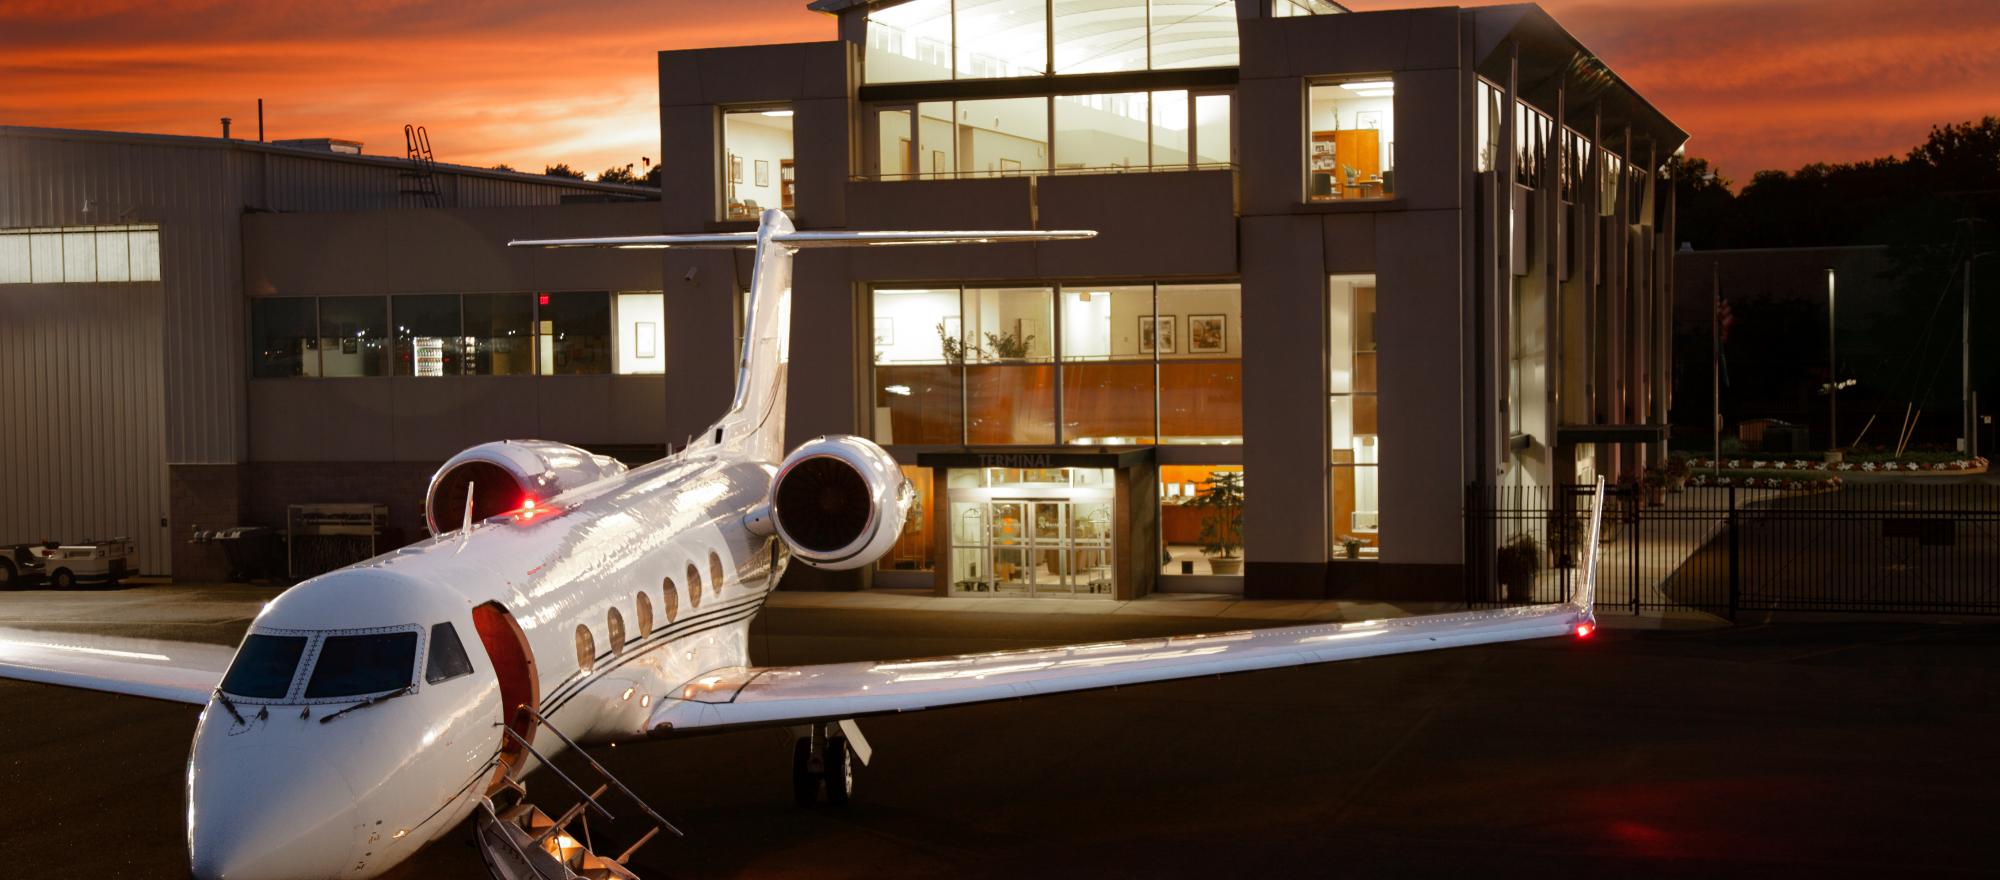 Teterboro, New Jersey-based charter company Meridian also offers FBO, aircraft management and maintenance services.